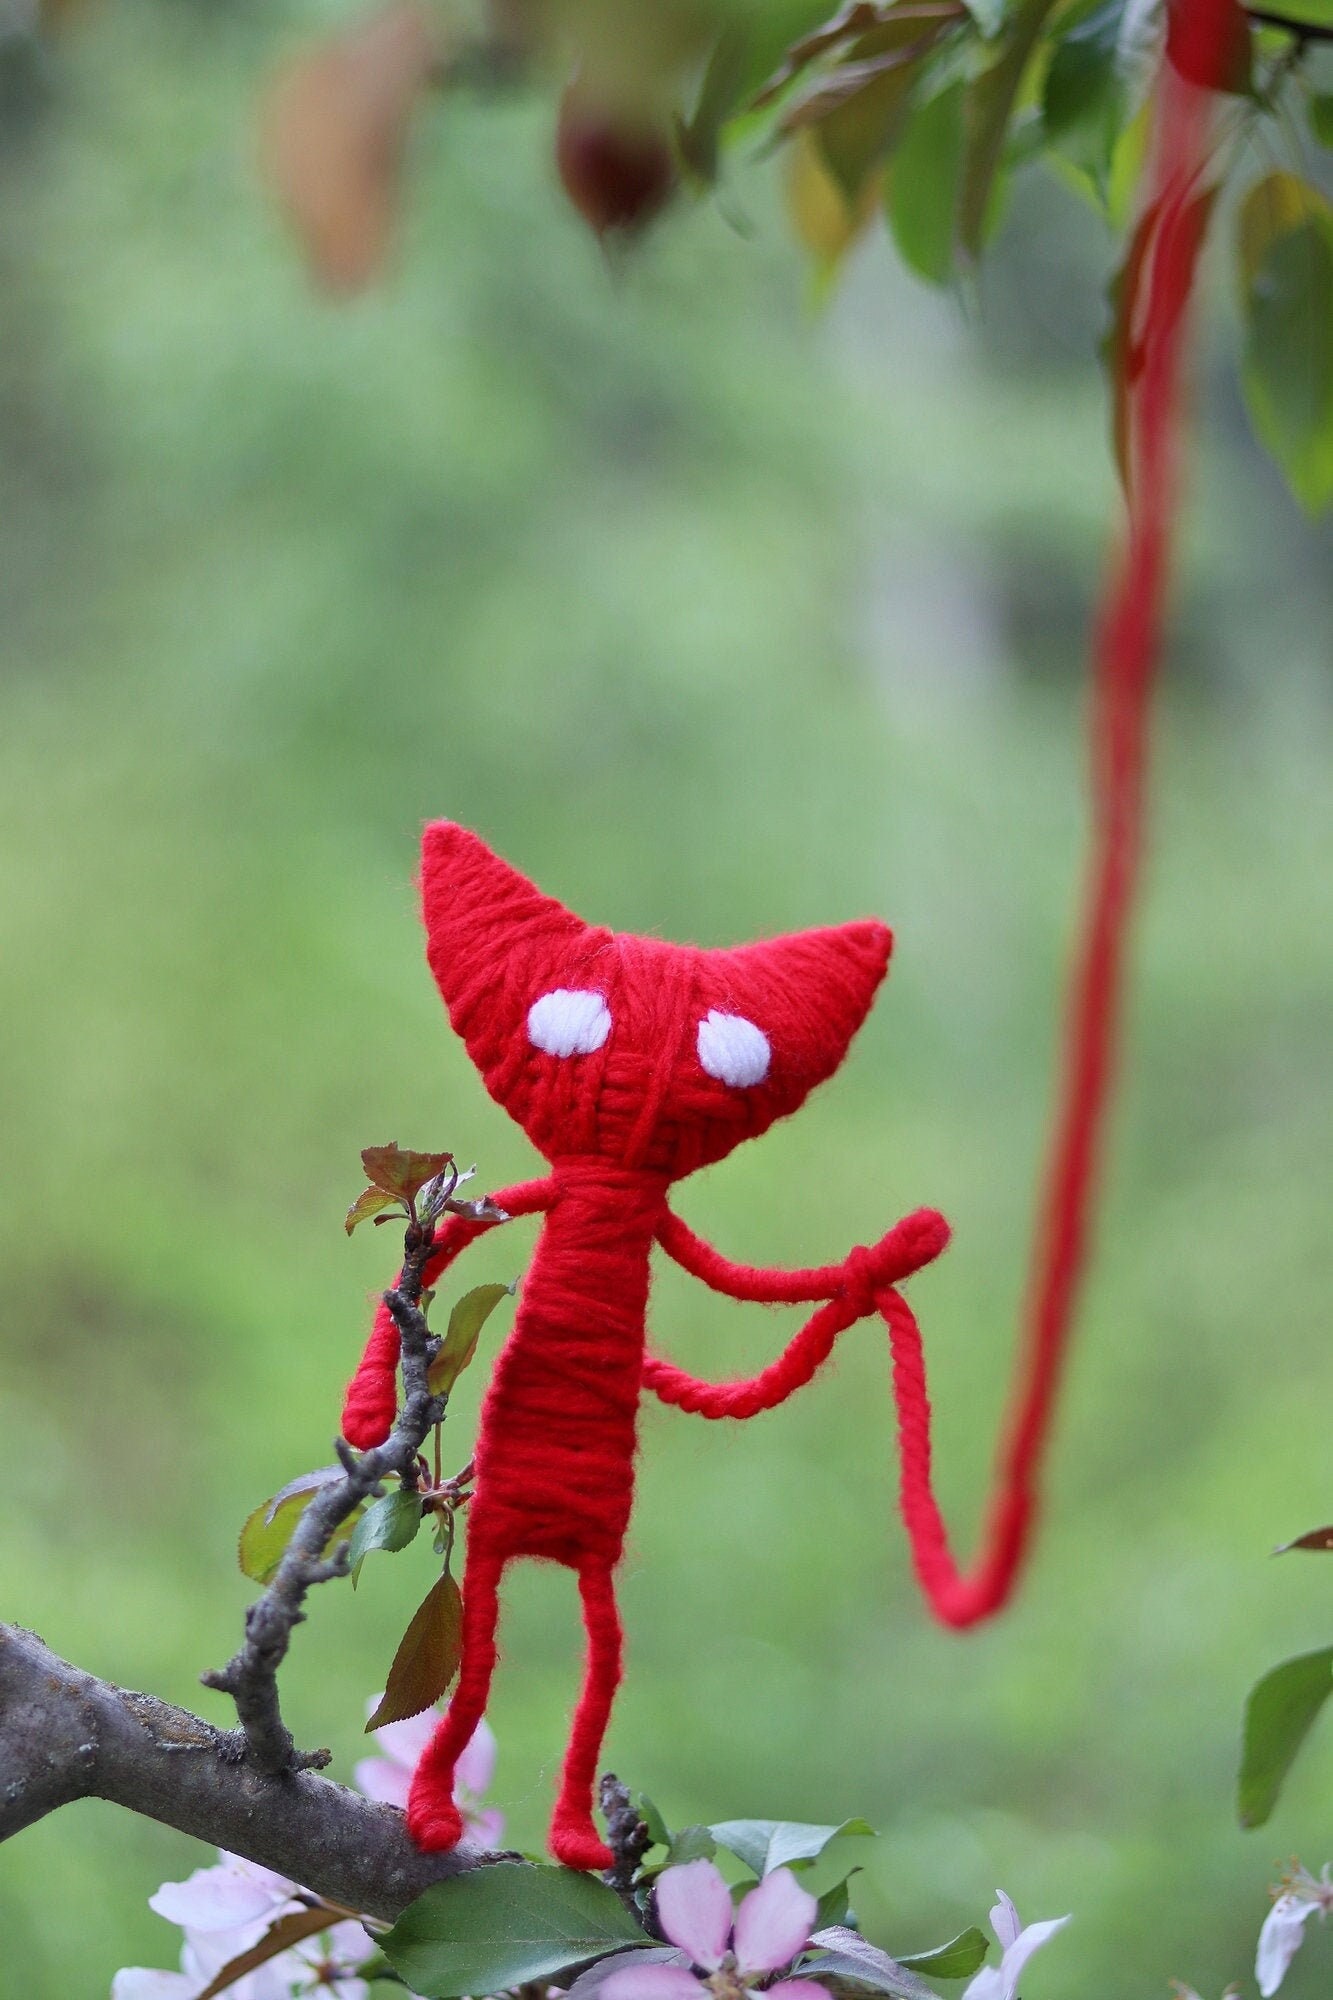 Yarny doll based off of the video game Unravel by EA Games -  Portugal